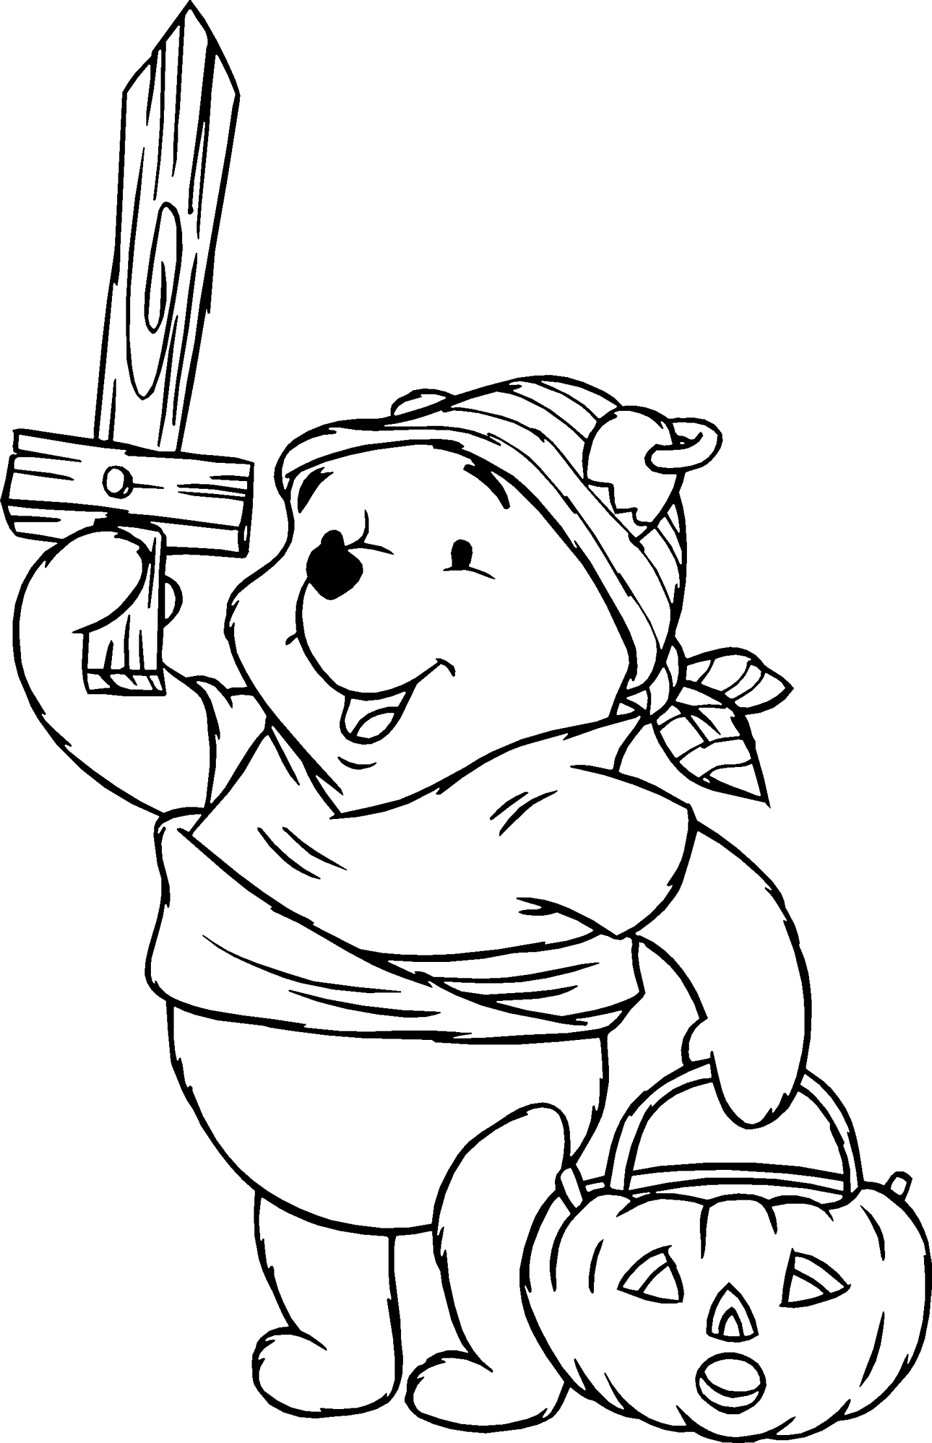 Kids Coloring Book
 Free Printable Winnie The Pooh Coloring Pages For Kids